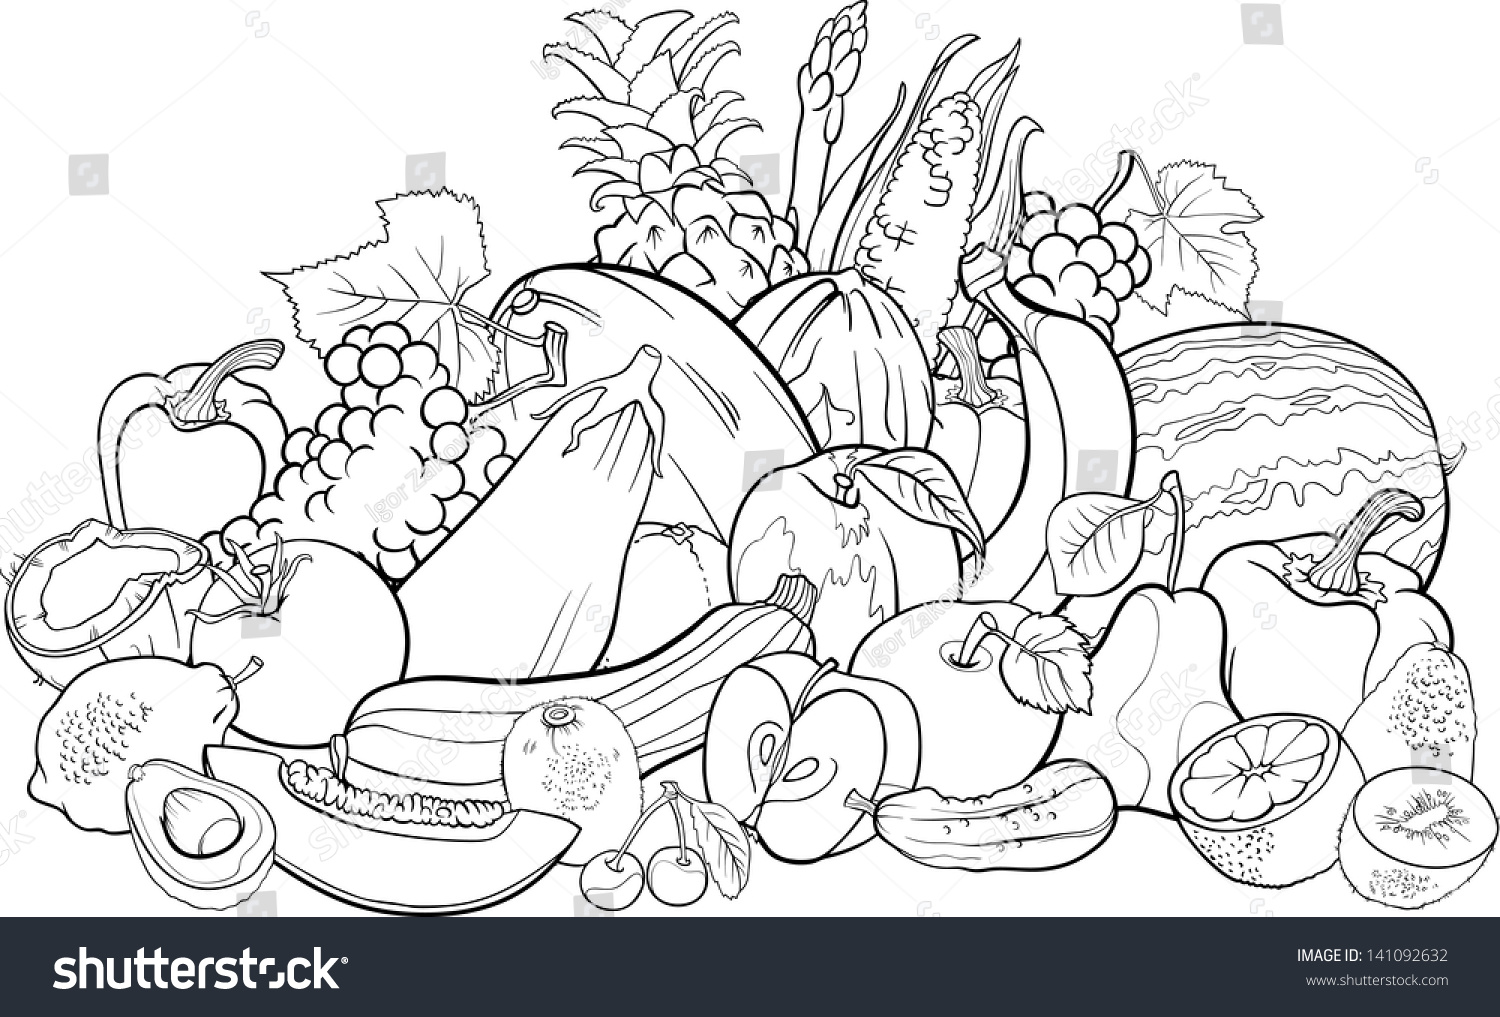 free clipart vegetables black and white - photo #39